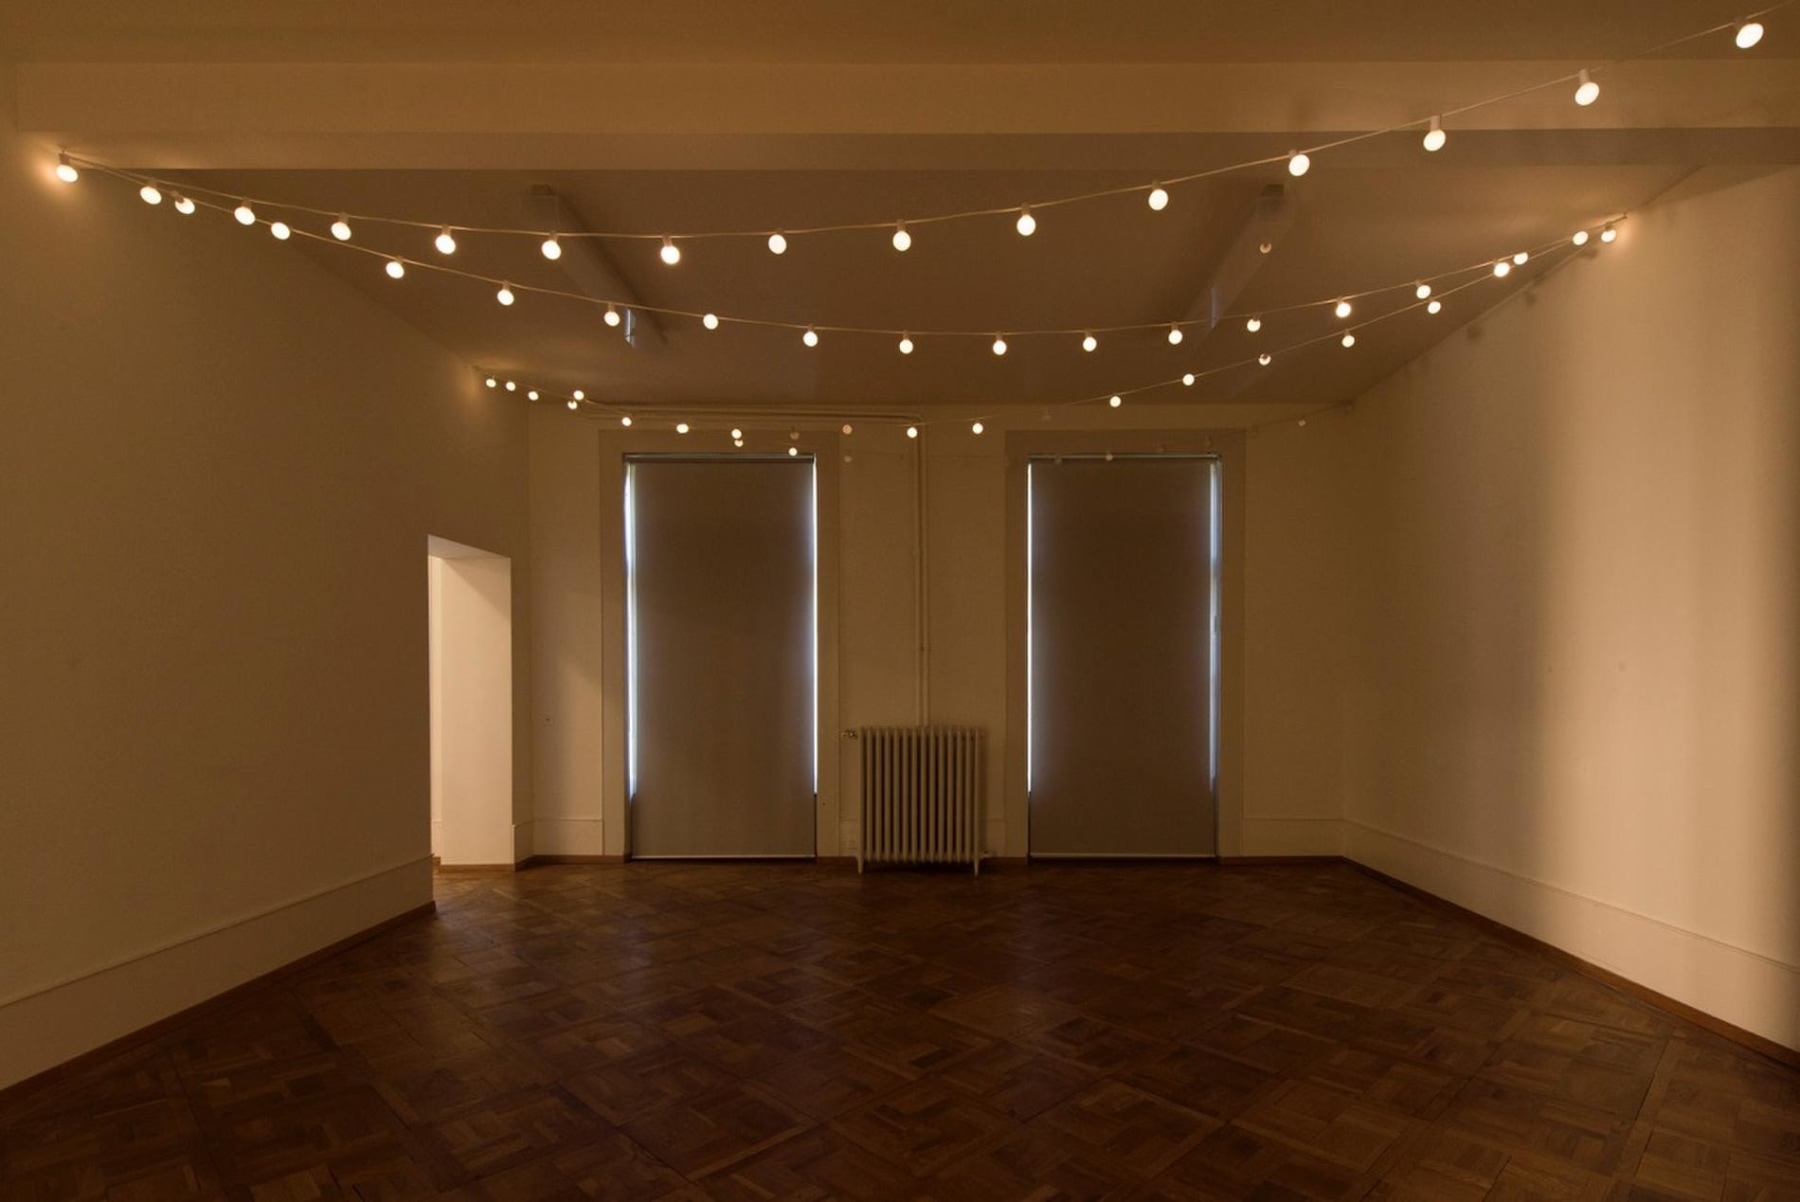 dimly lit room with two windows with the shades down, string of lightbulbs on the ceiling